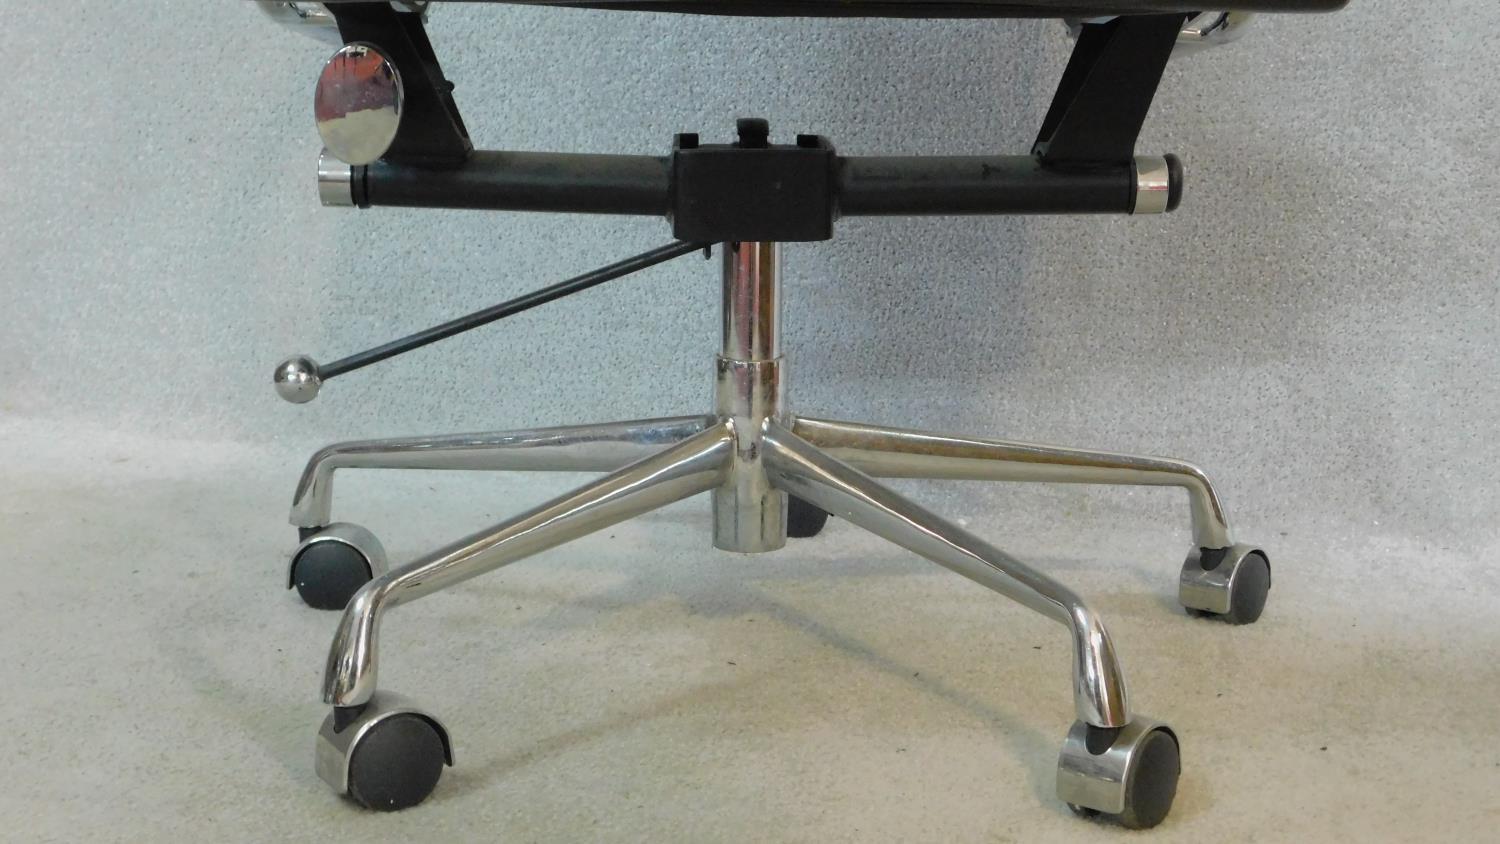 A vintage Charles and Ray Eames inspired Aluminium Group style office desk armchair in black - Image 5 of 6